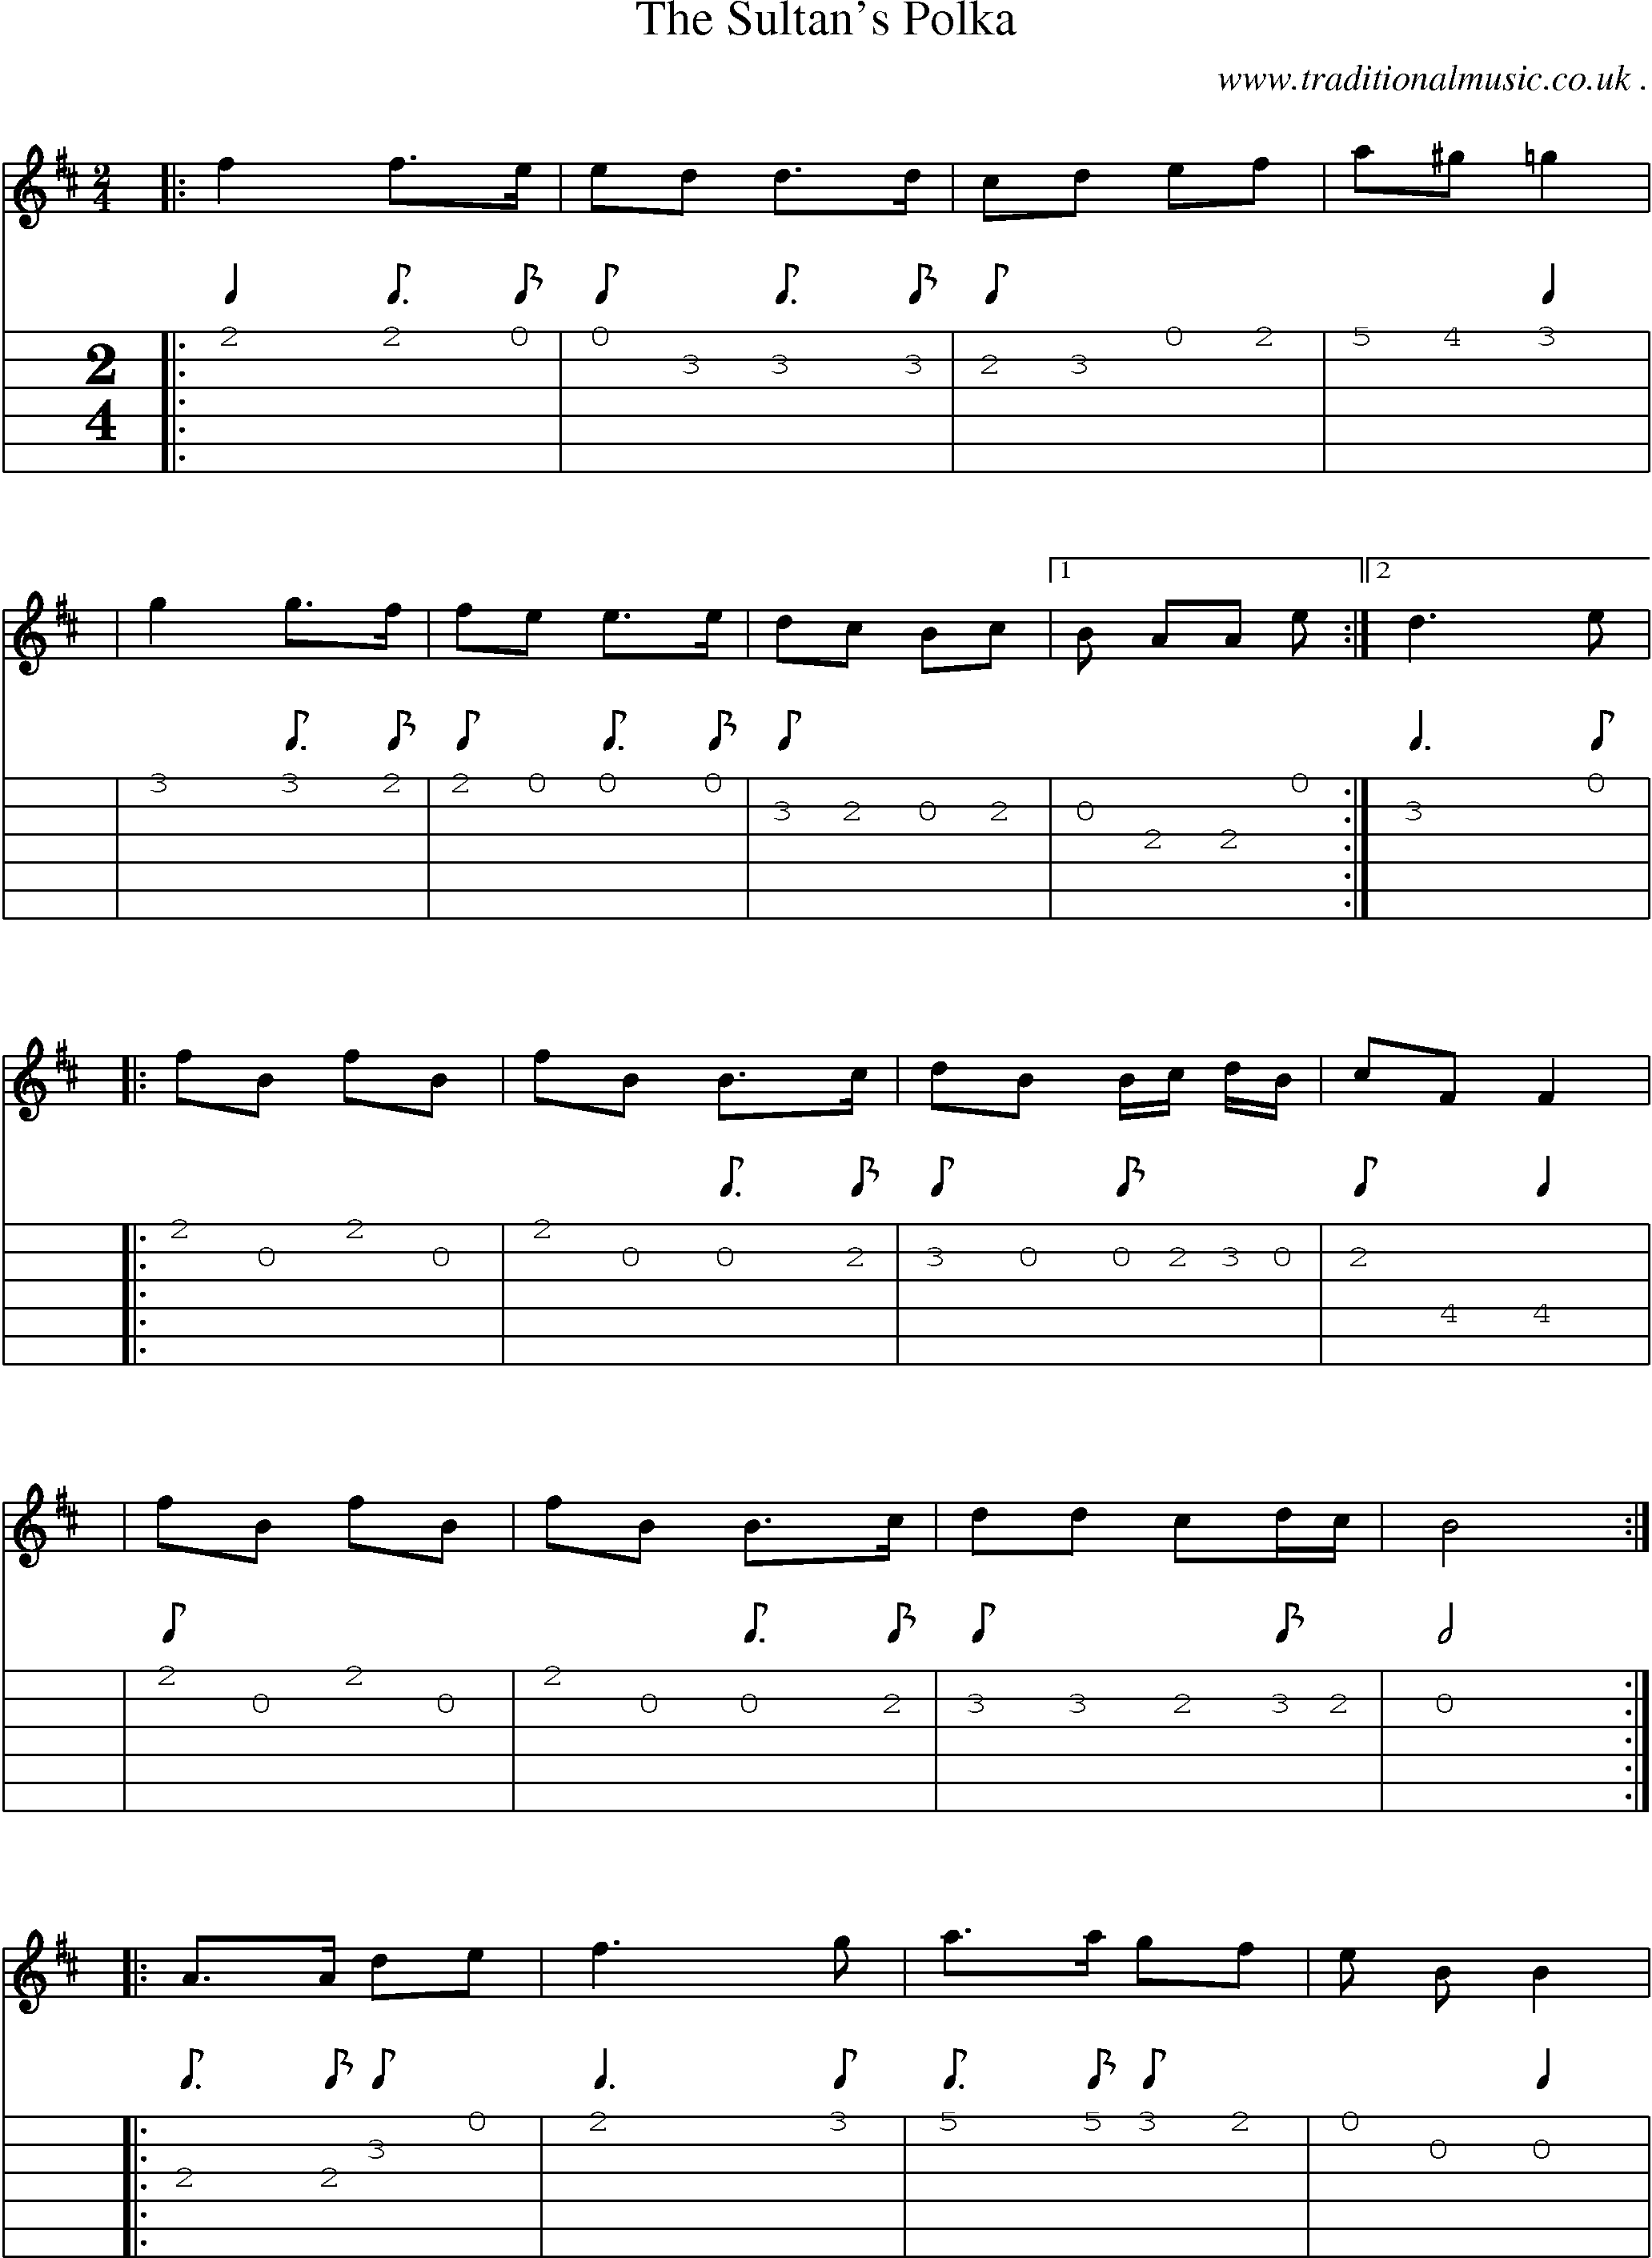 Sheet-Music and Guitar Tabs for The Sultans Polka